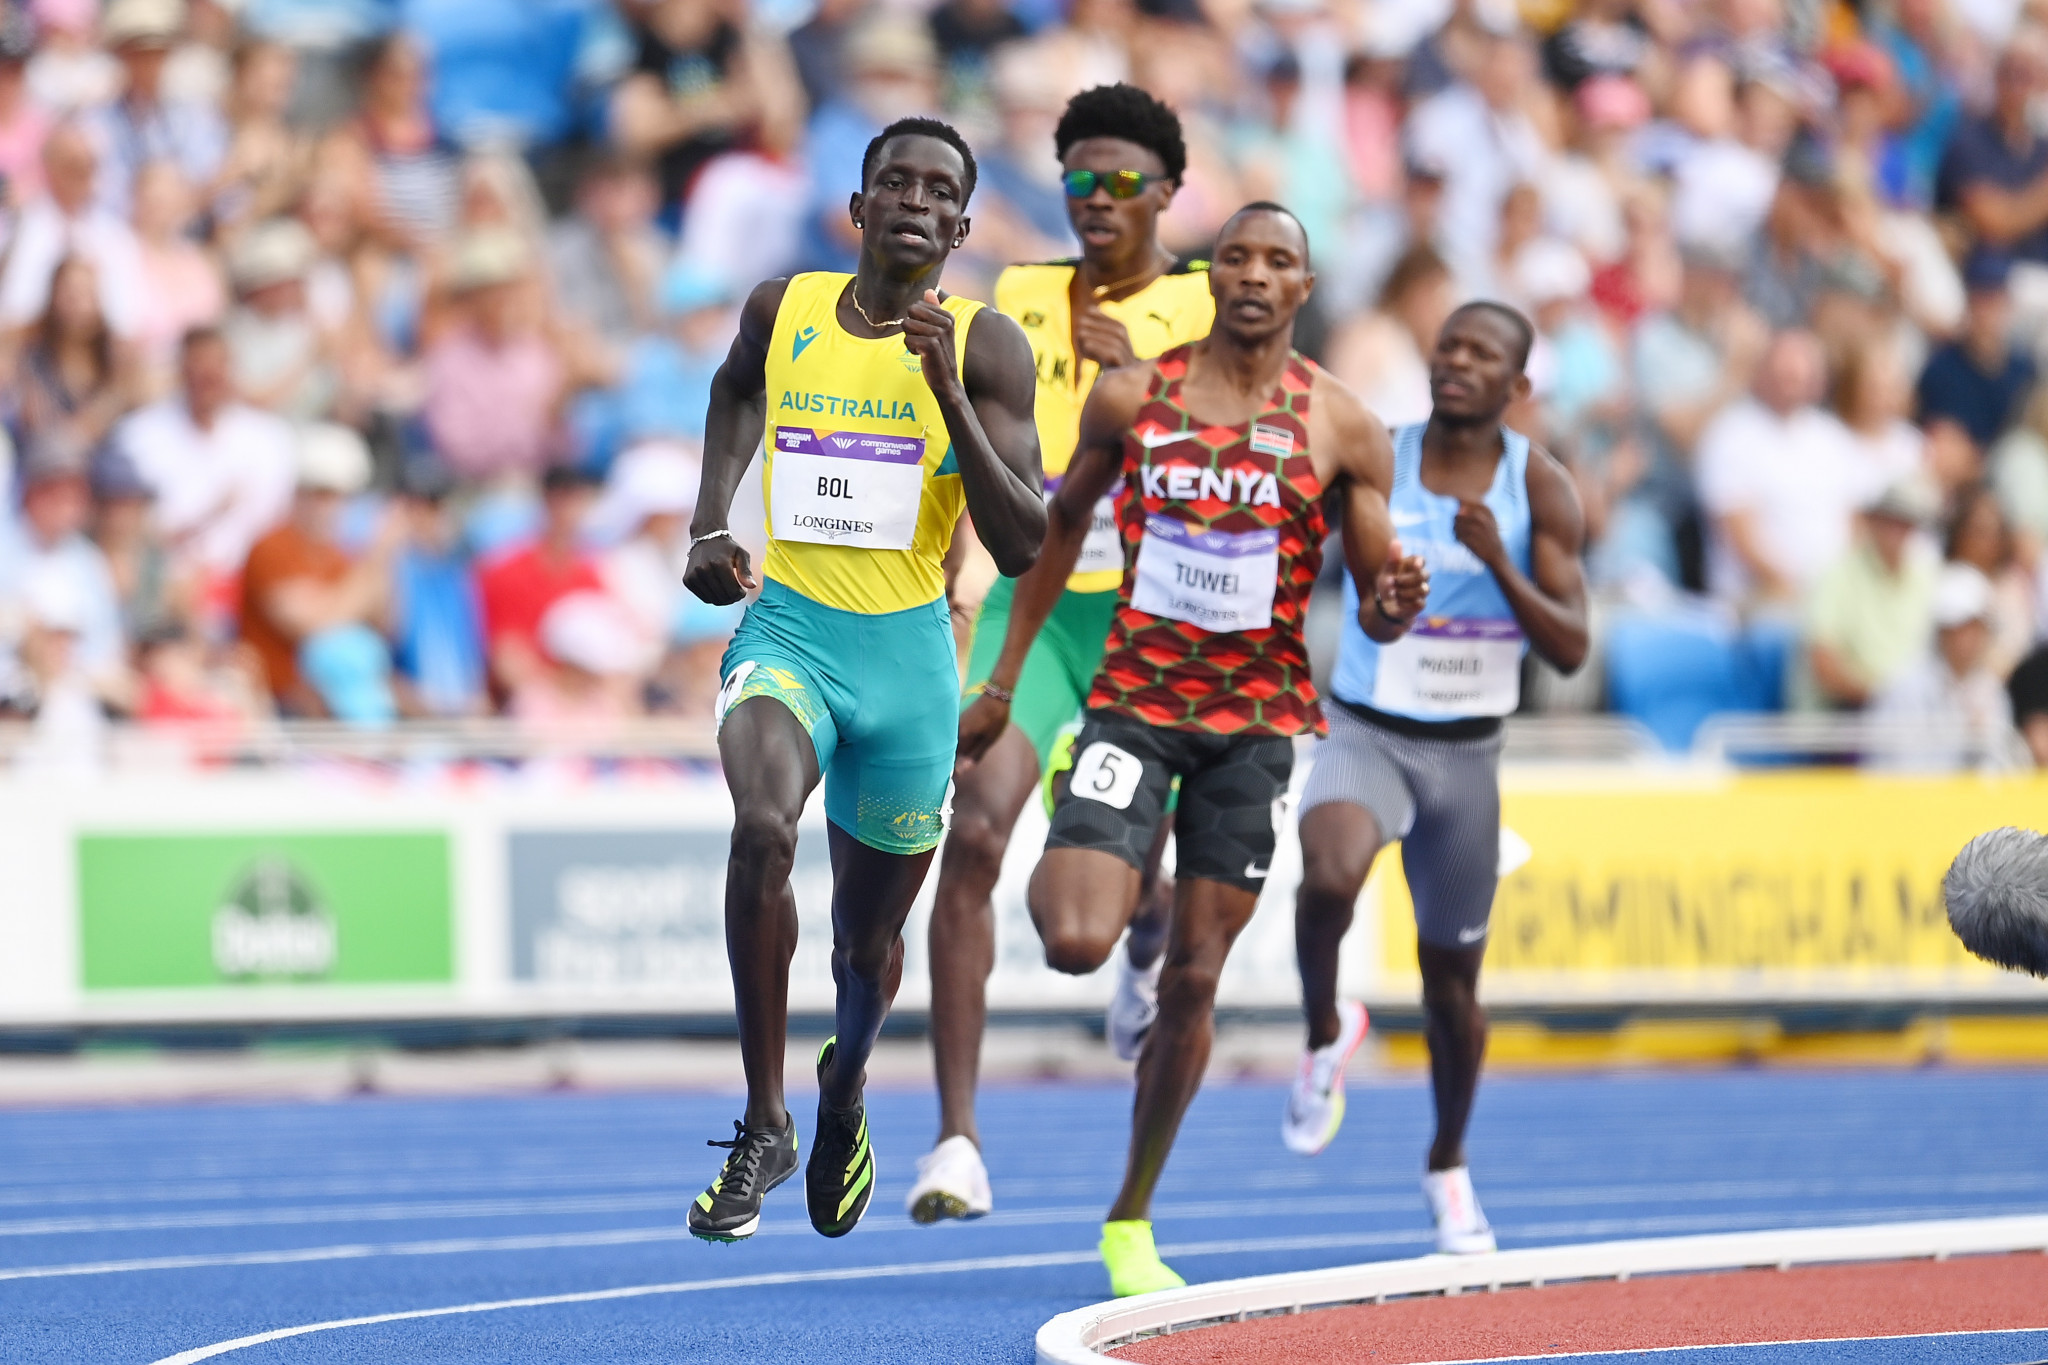 Sudan-born Bol claimed men's 800m silver at the Birmingham 2022 Commonwealth Games ©Getty Images